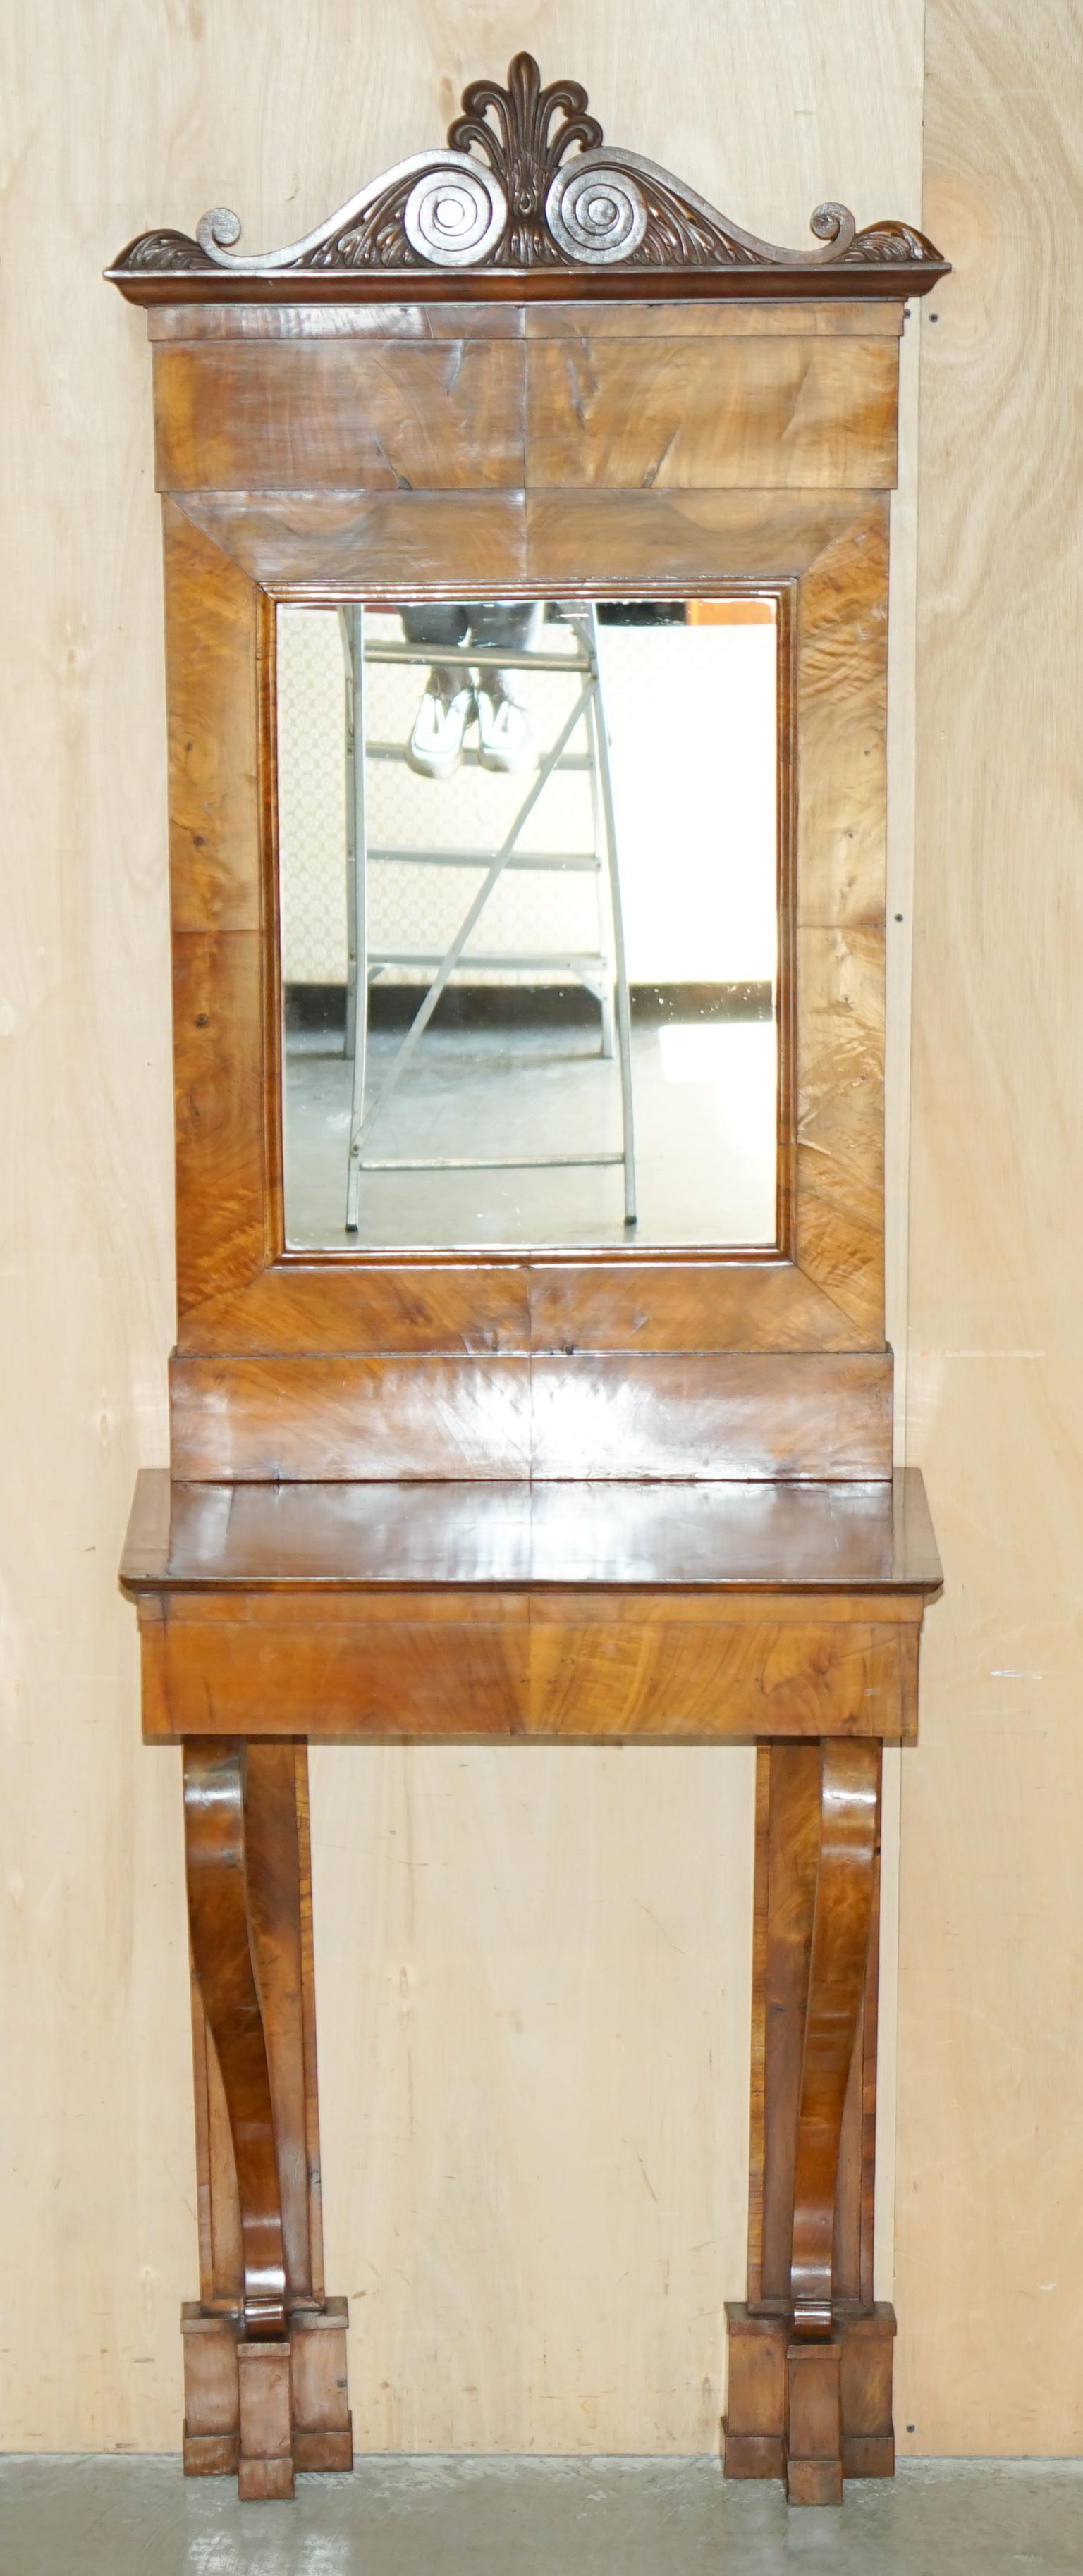 PAIR OF FULLY RESTORED ANTIQUE CiRCA 1815 REGENCY WALNUT CONSOLE TABLES & MIRROr For Sale 11